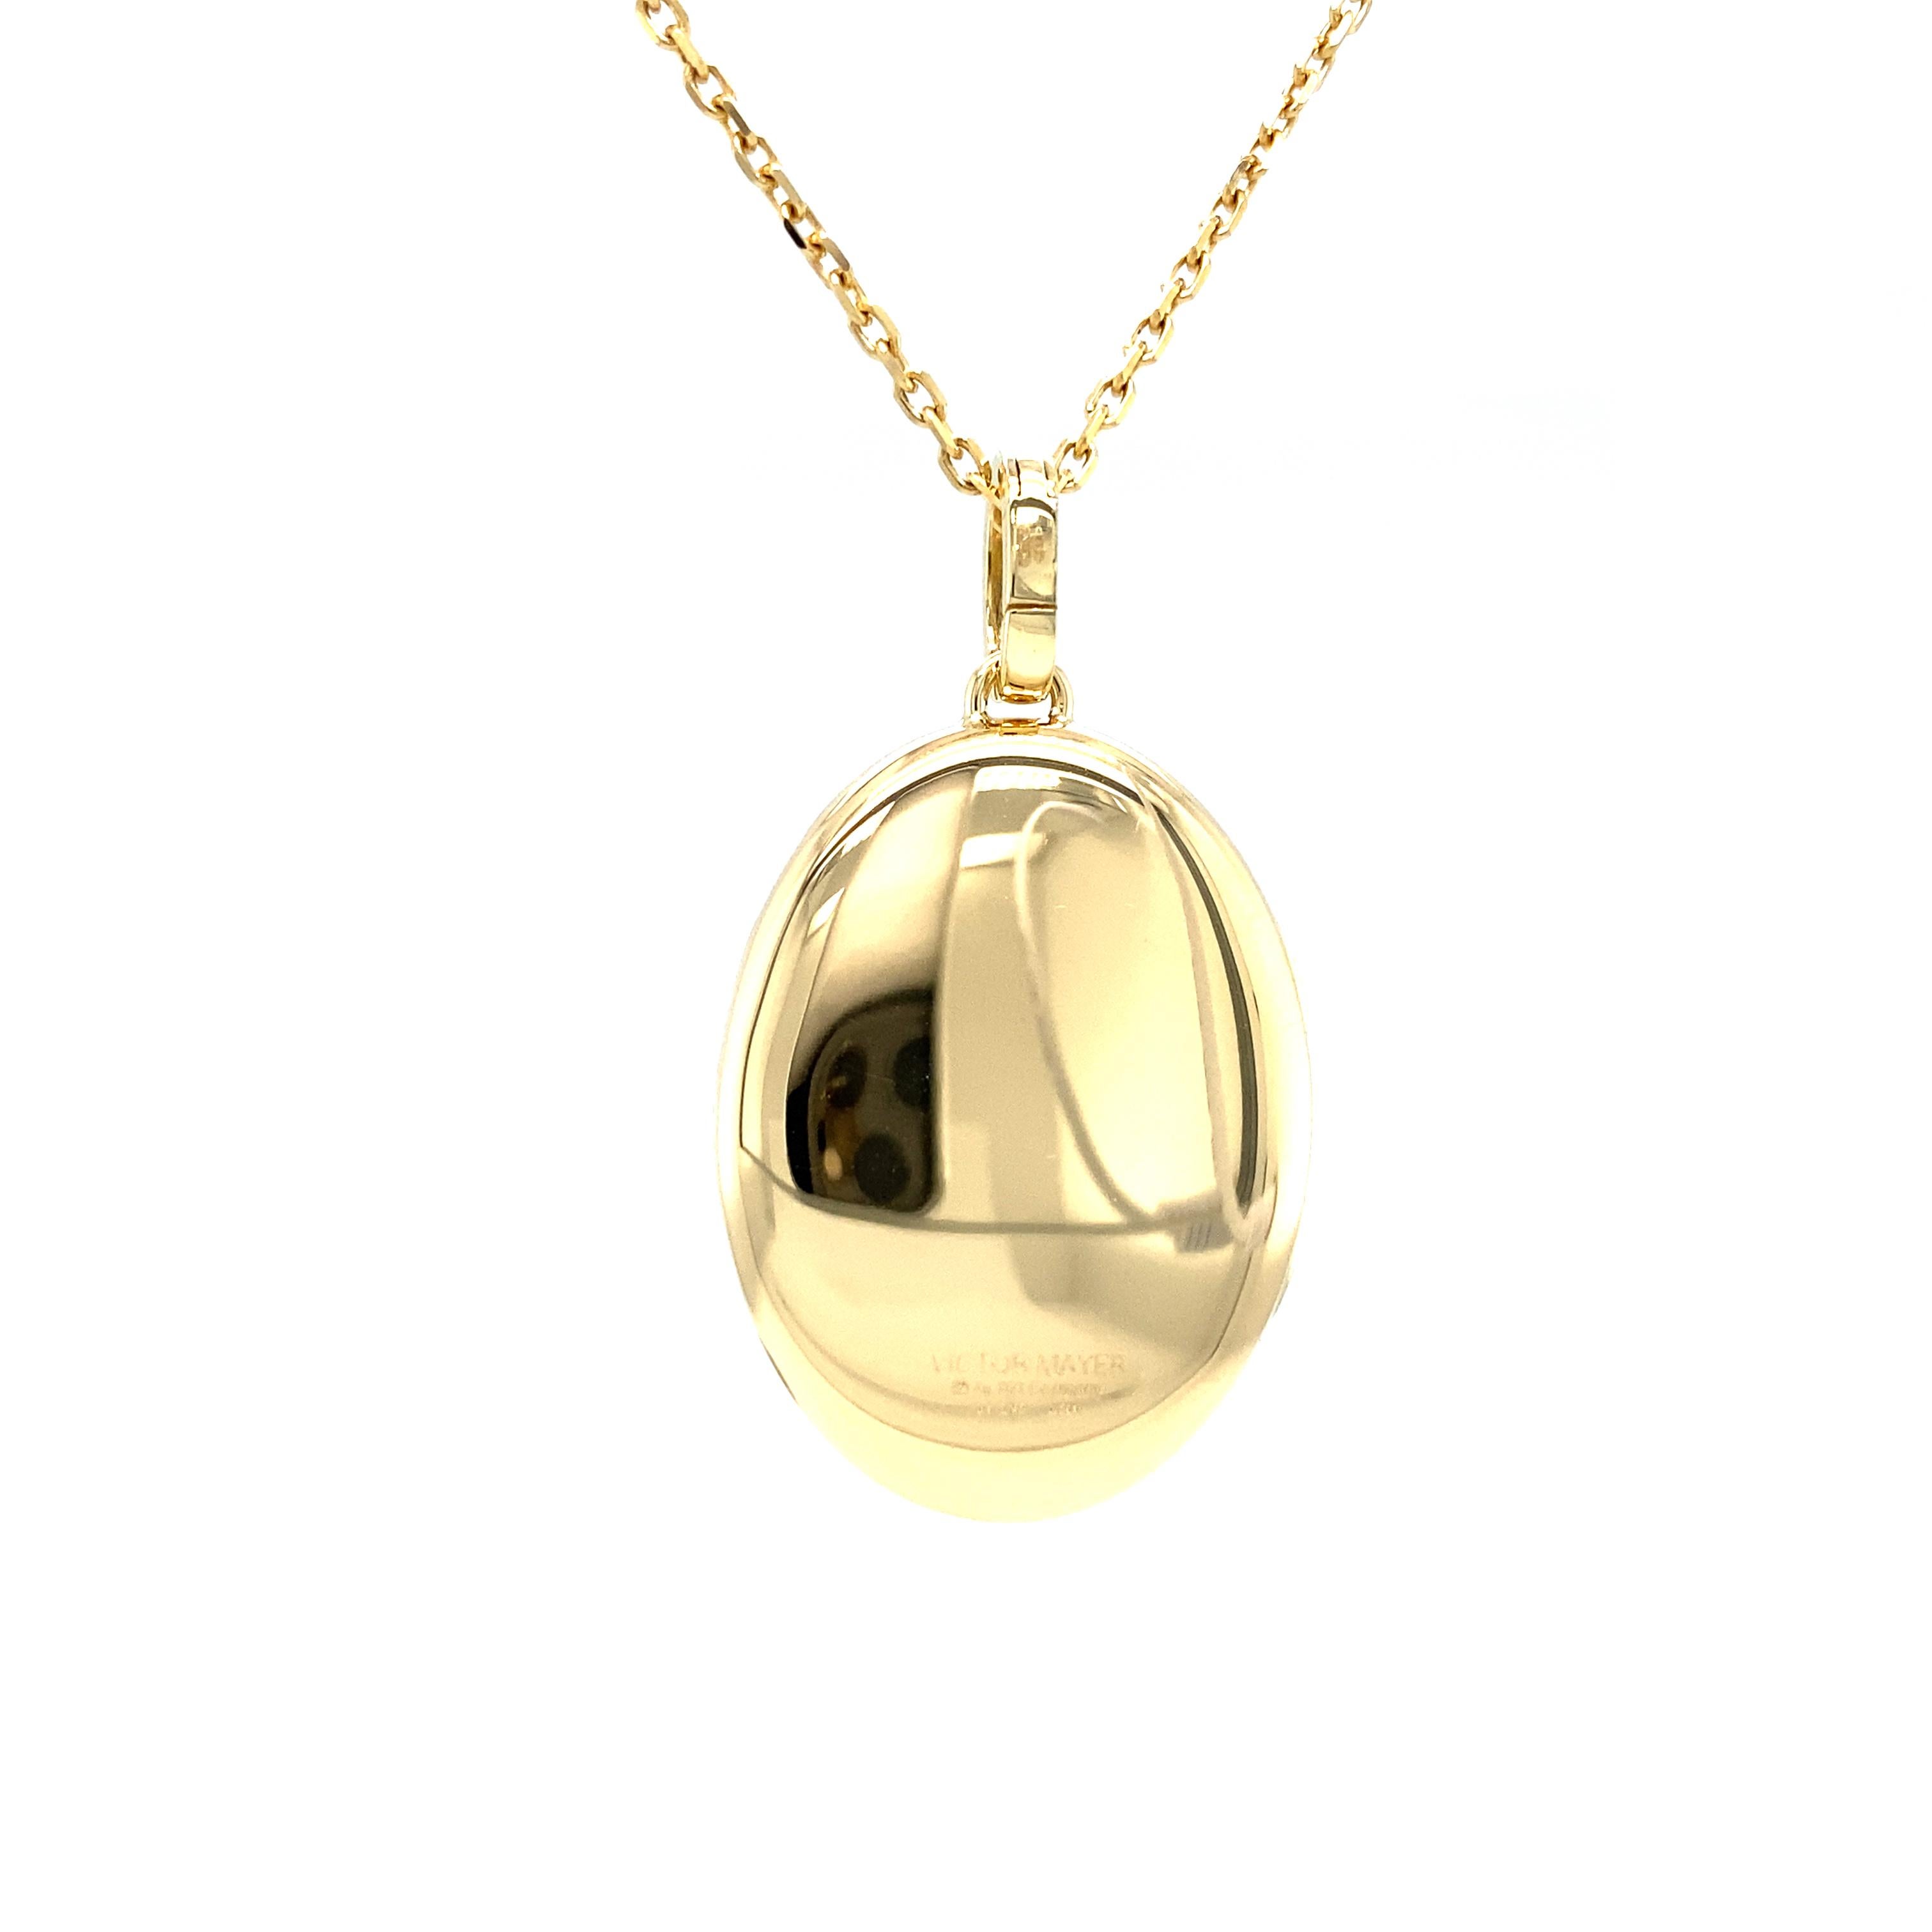 Oval Polished Locket Pendant Necklace - 18k Yellow Gold - 9 Diamonds 0.14ct G VS For Sale 2